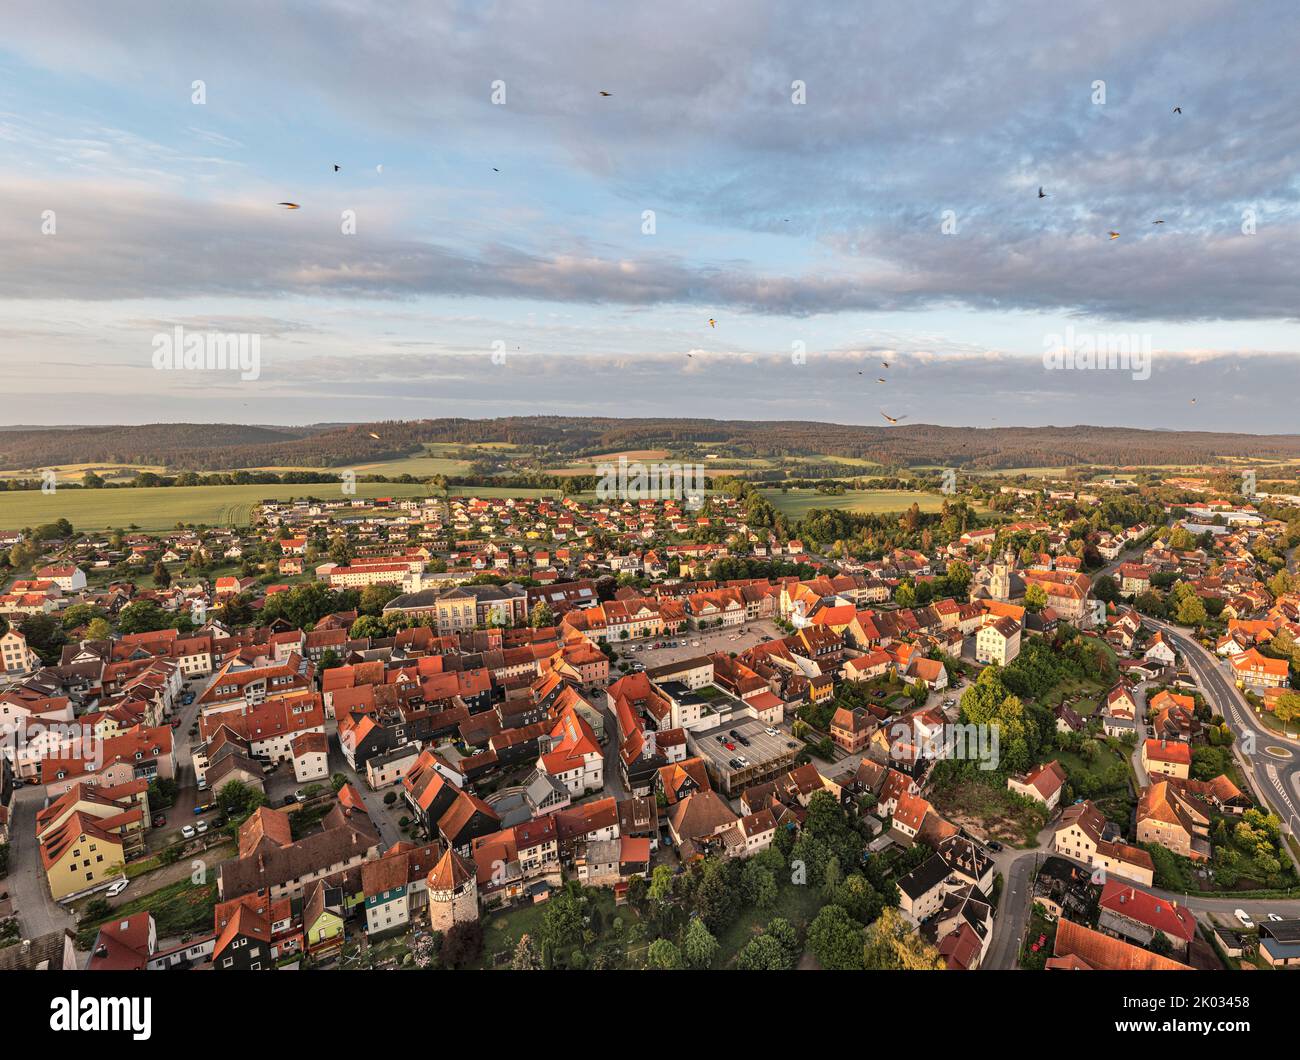 Germany, Thuringia, Schleusingen, city, market place, Bertholdsburg castle, St. Johannis city church, center, forest and mountains in background, morning light, overview, aerial view Stock Photo